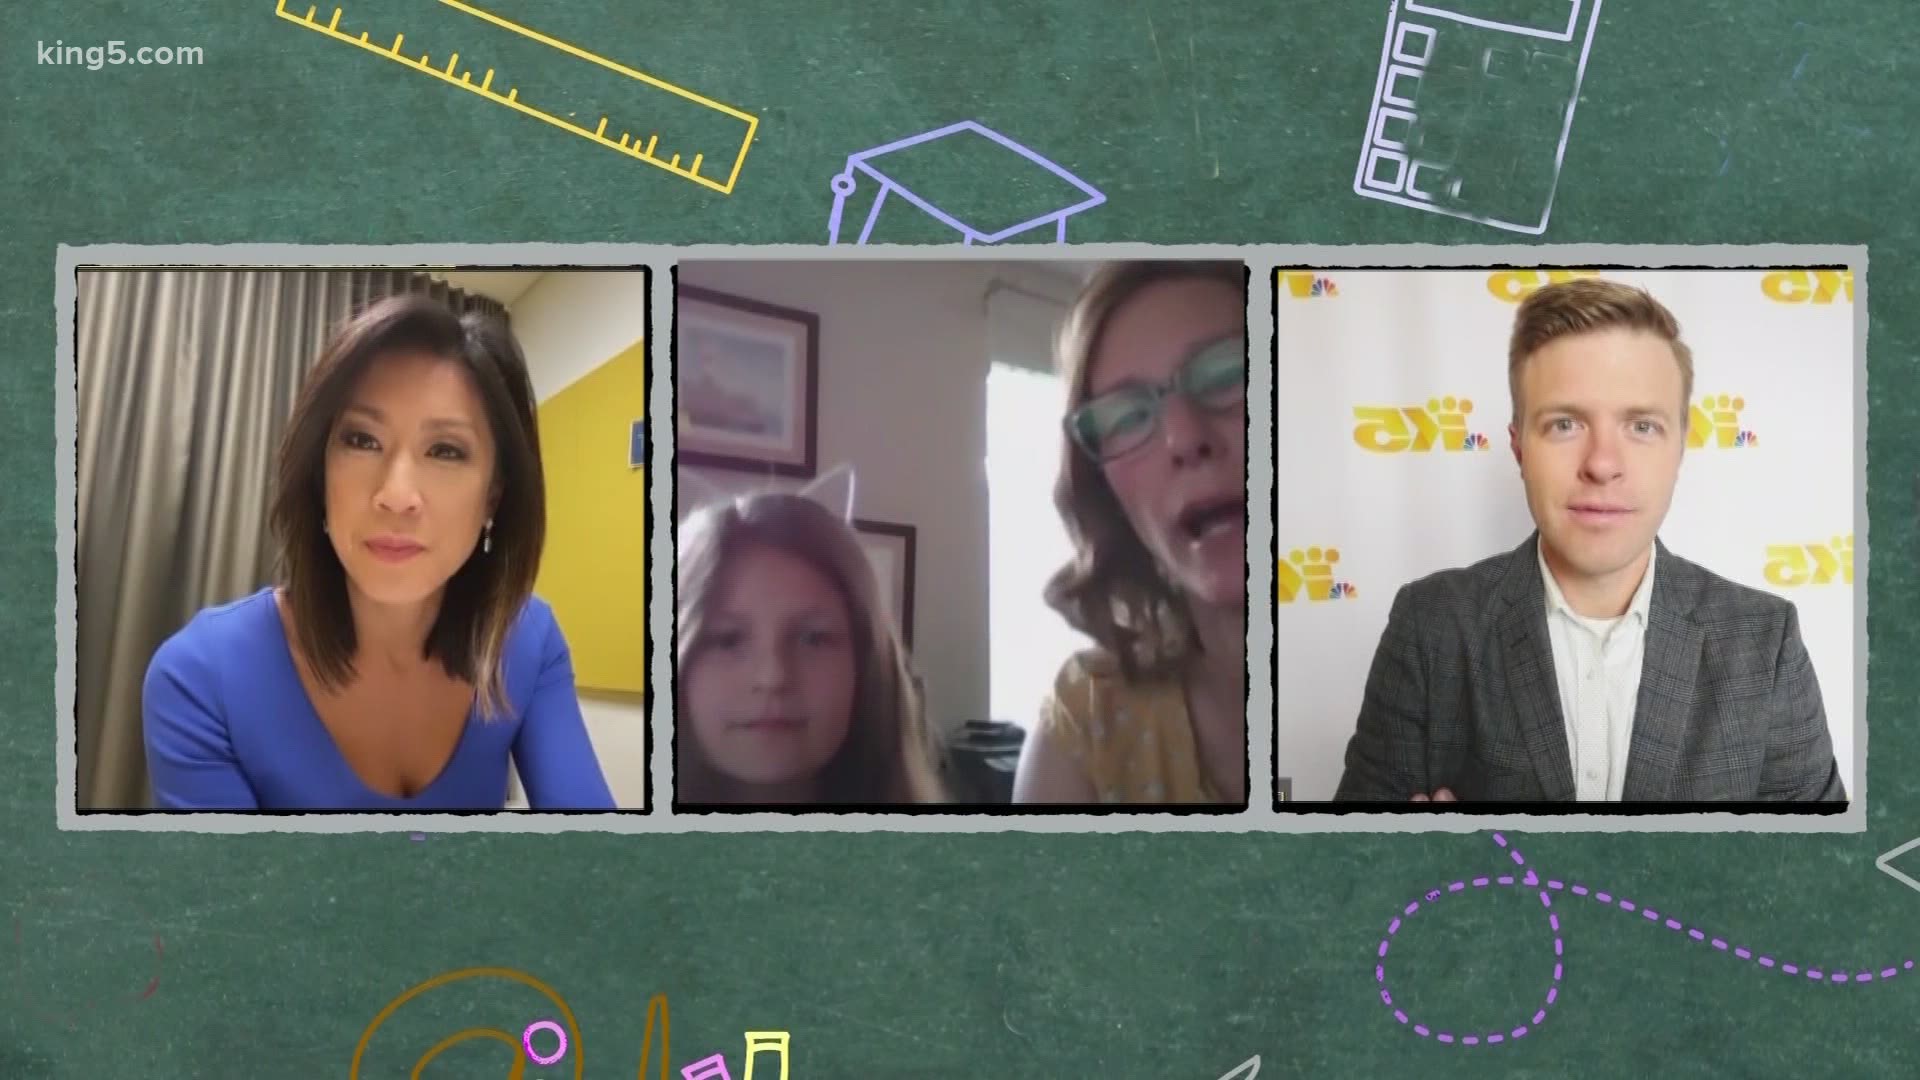 The Zurita family from Shoreline shares tips on how to stay sharp while remote learning.